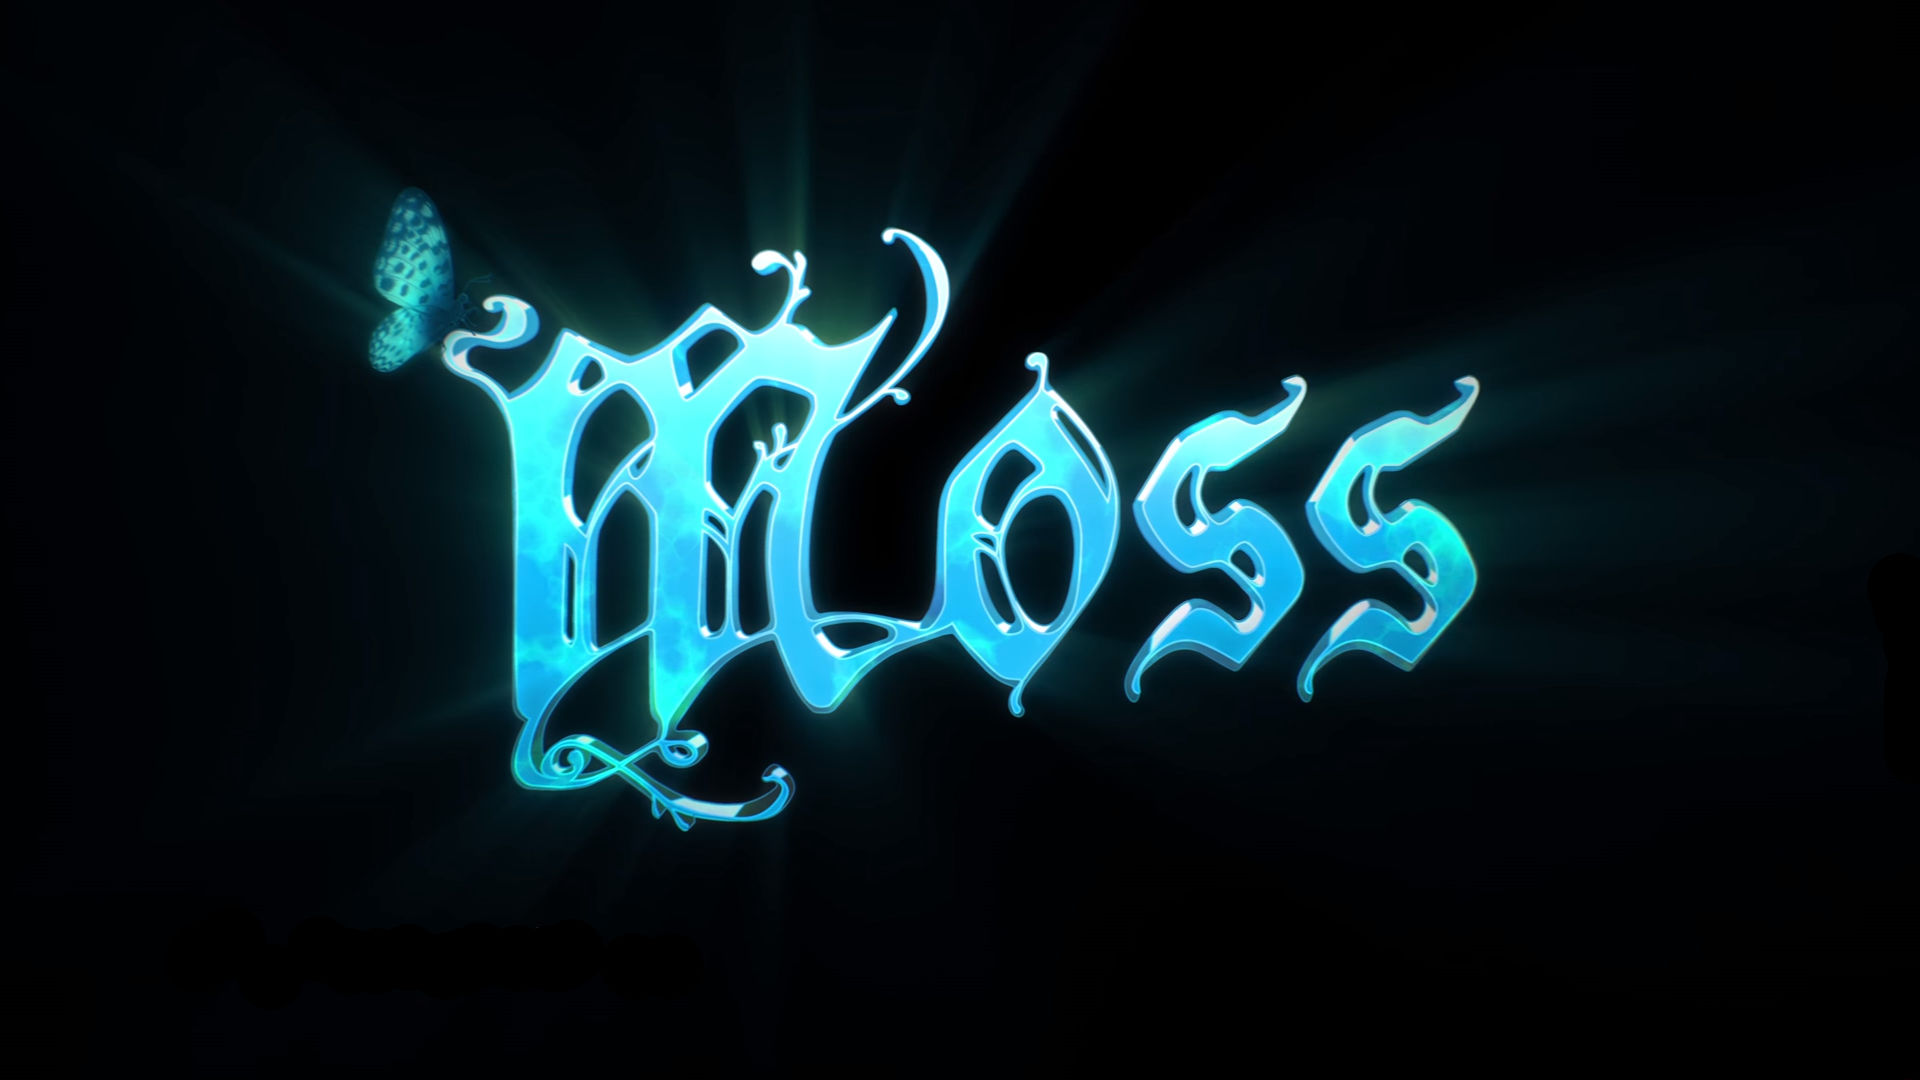 moss 2 vr release date download